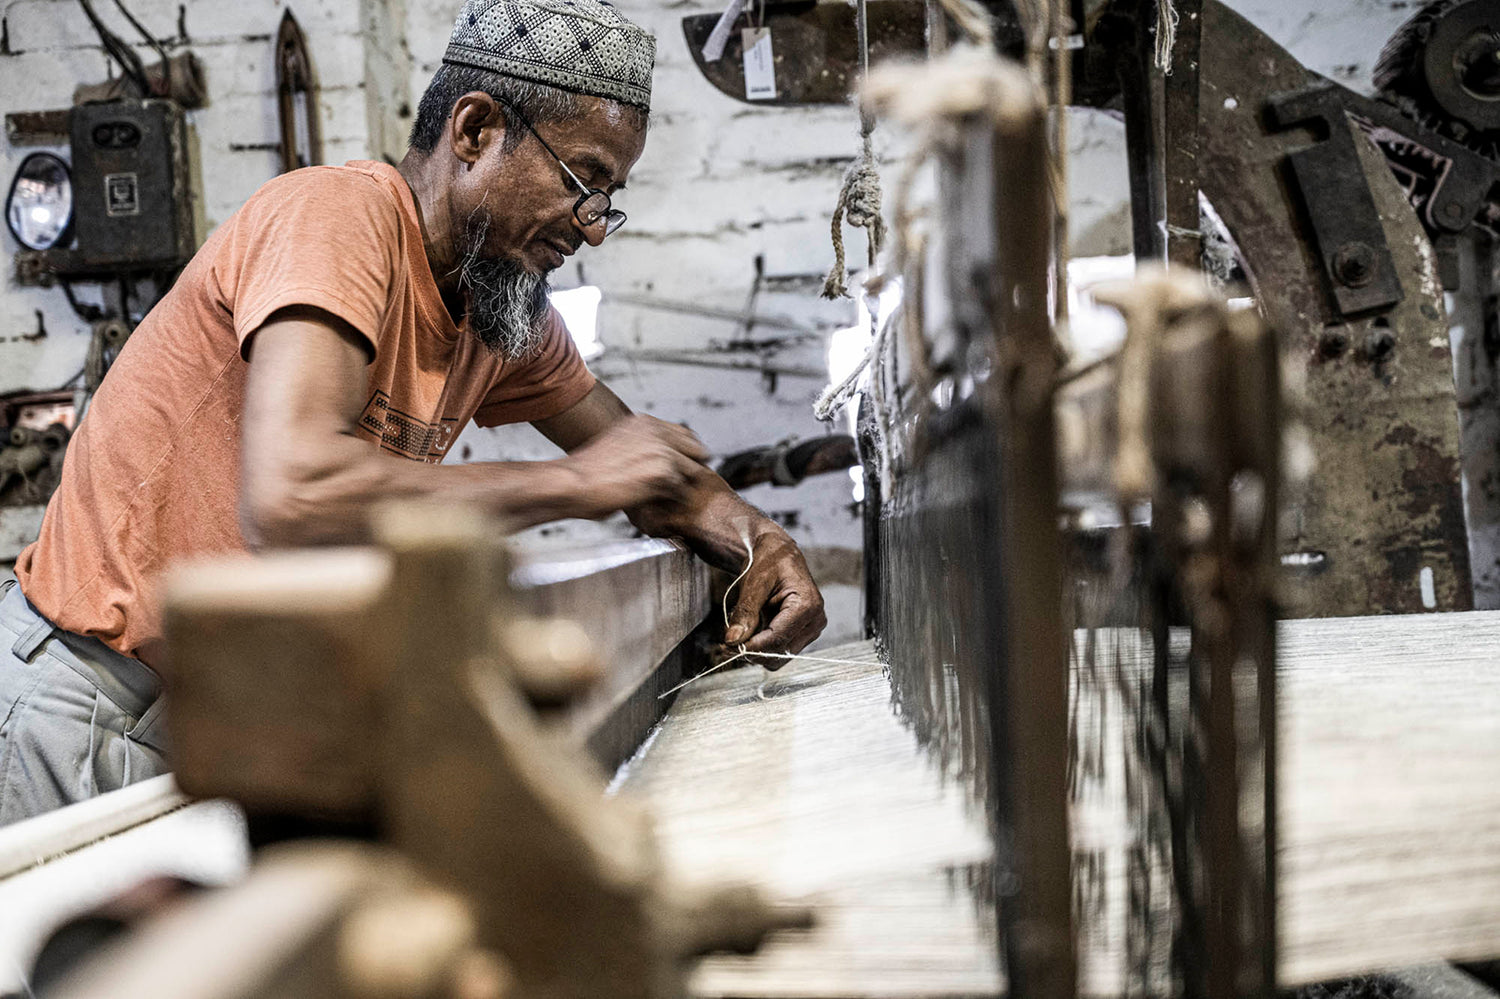 ancient technique of hand looming linen weaves in India by artisans